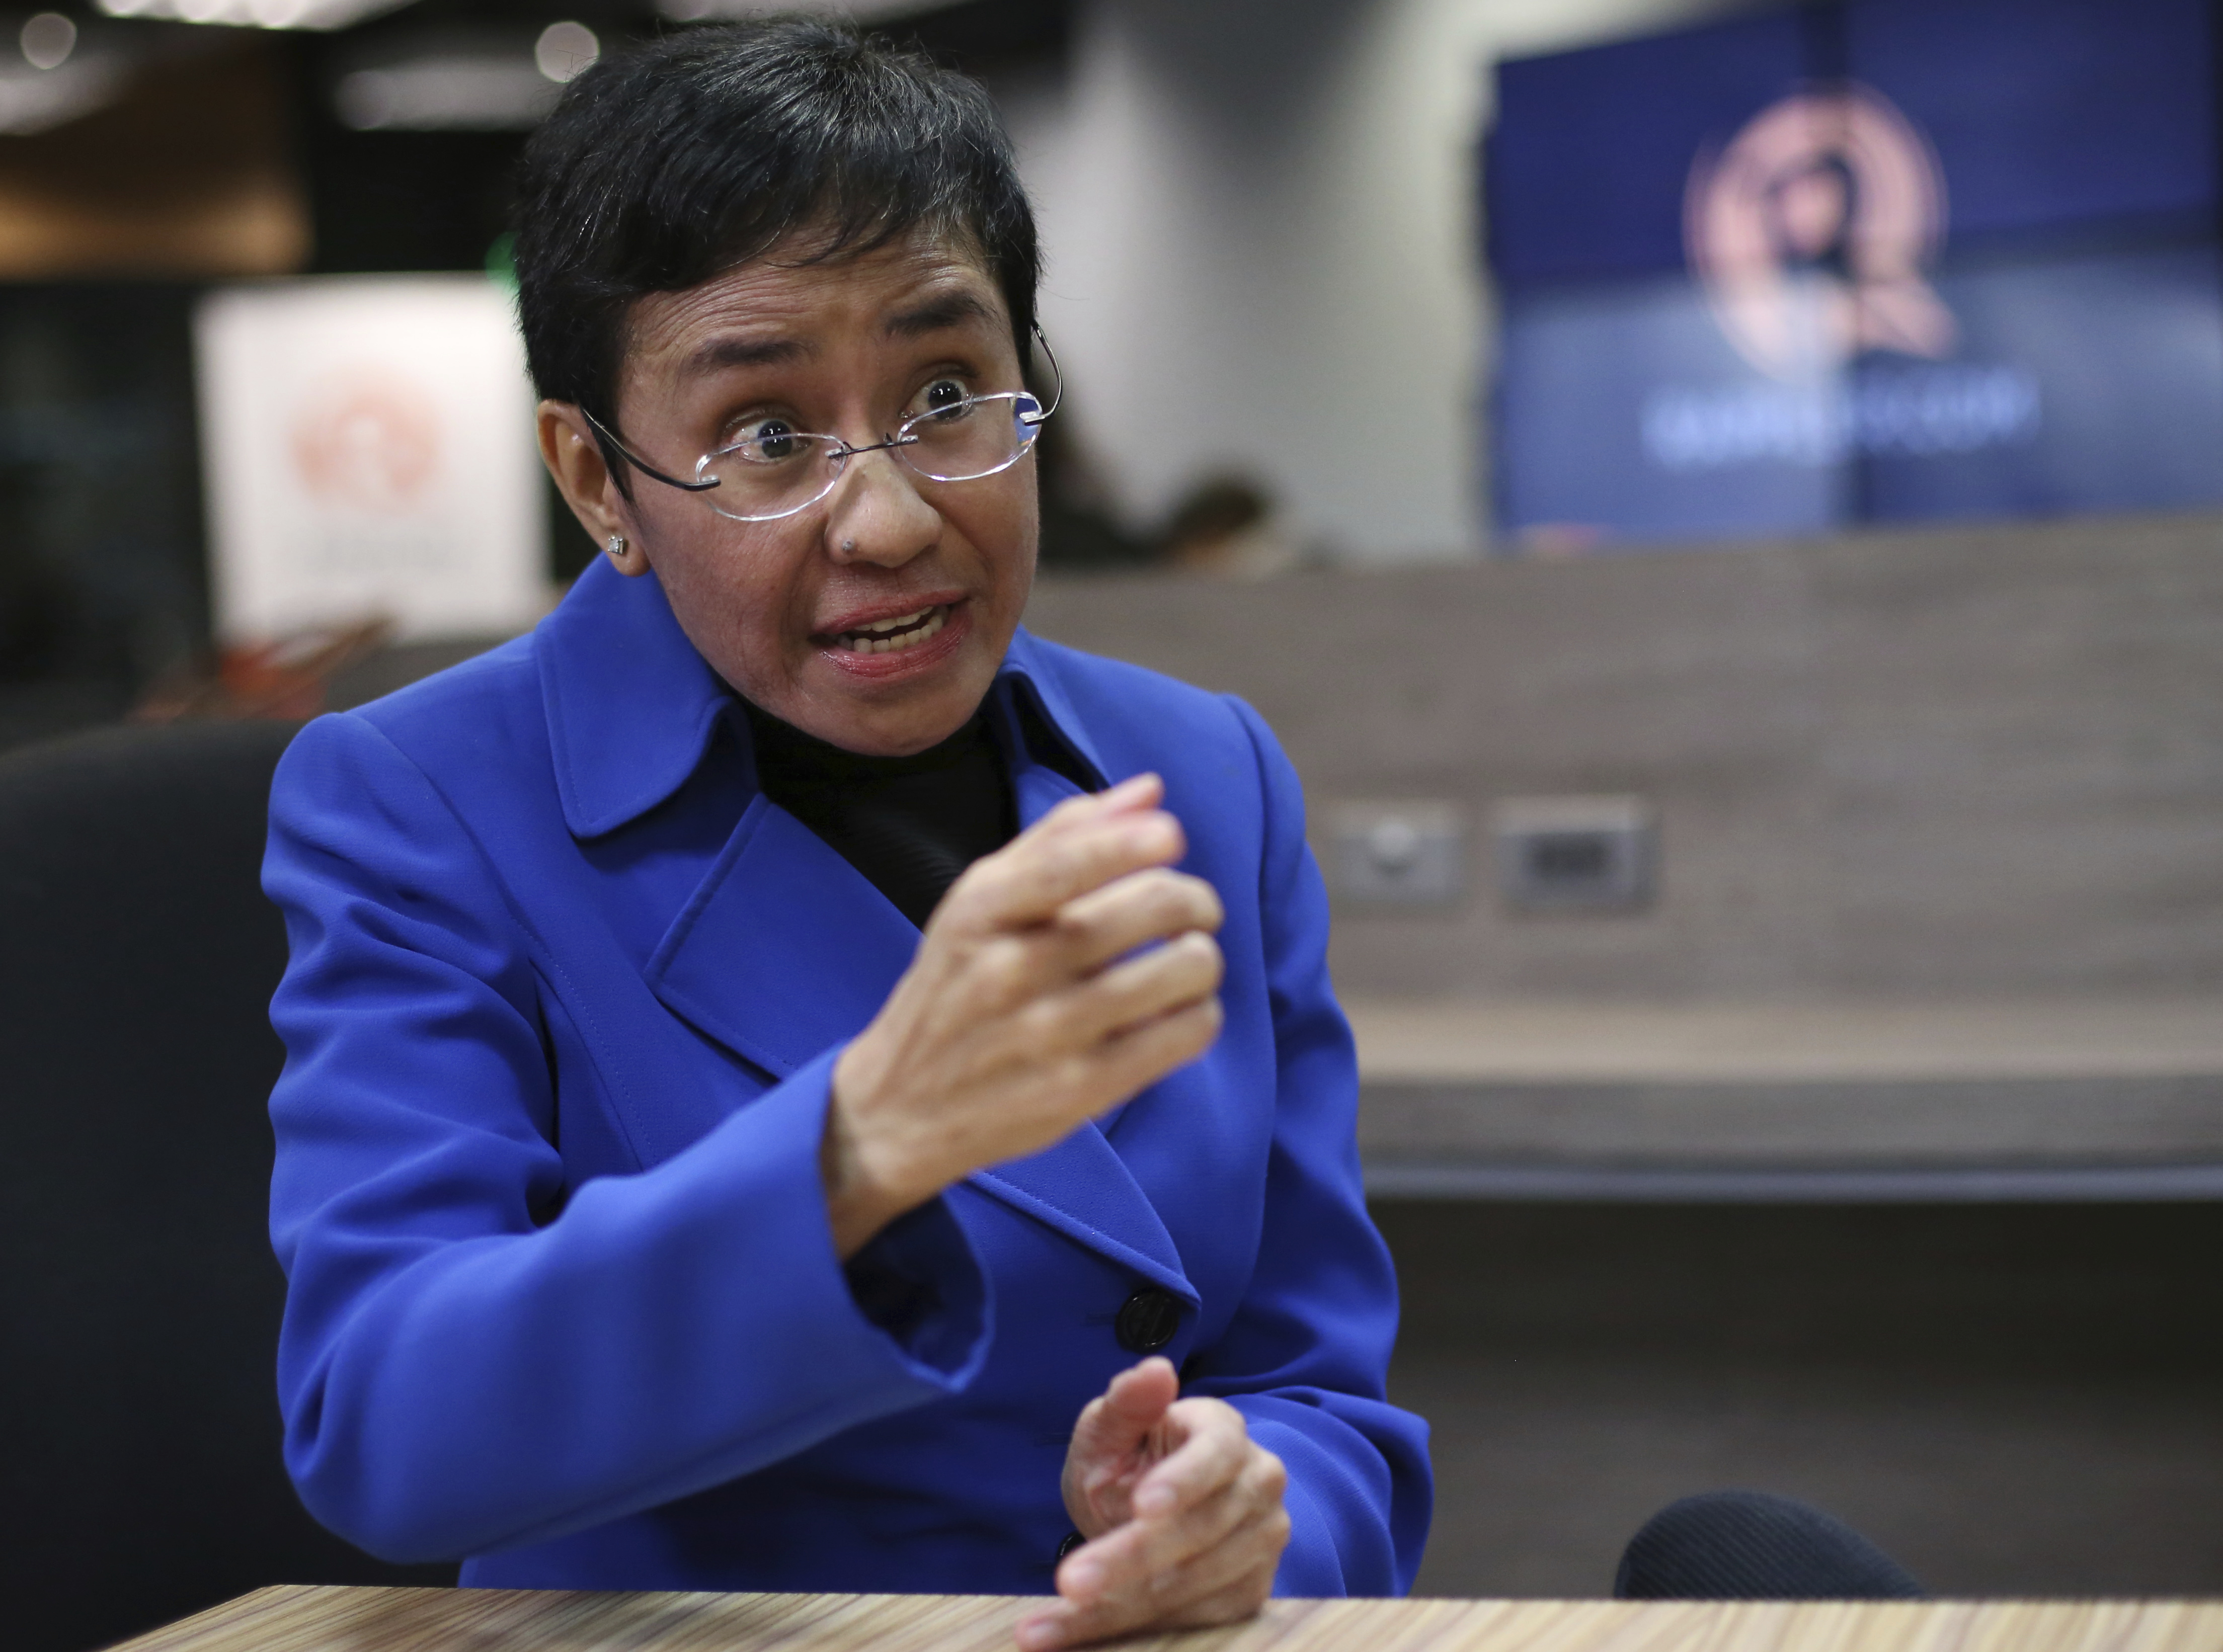 Rappler CEO and executive editor Maria Ressa gestures during an interview at their office in metropolitan Manila, Philippines in January 2018. The Rappler faces serious threats from both President Duterte’s government and from Facebook, which has failed to stifle the army of trolls spreading misinformation and harassment campaigns against Ressa and her staff